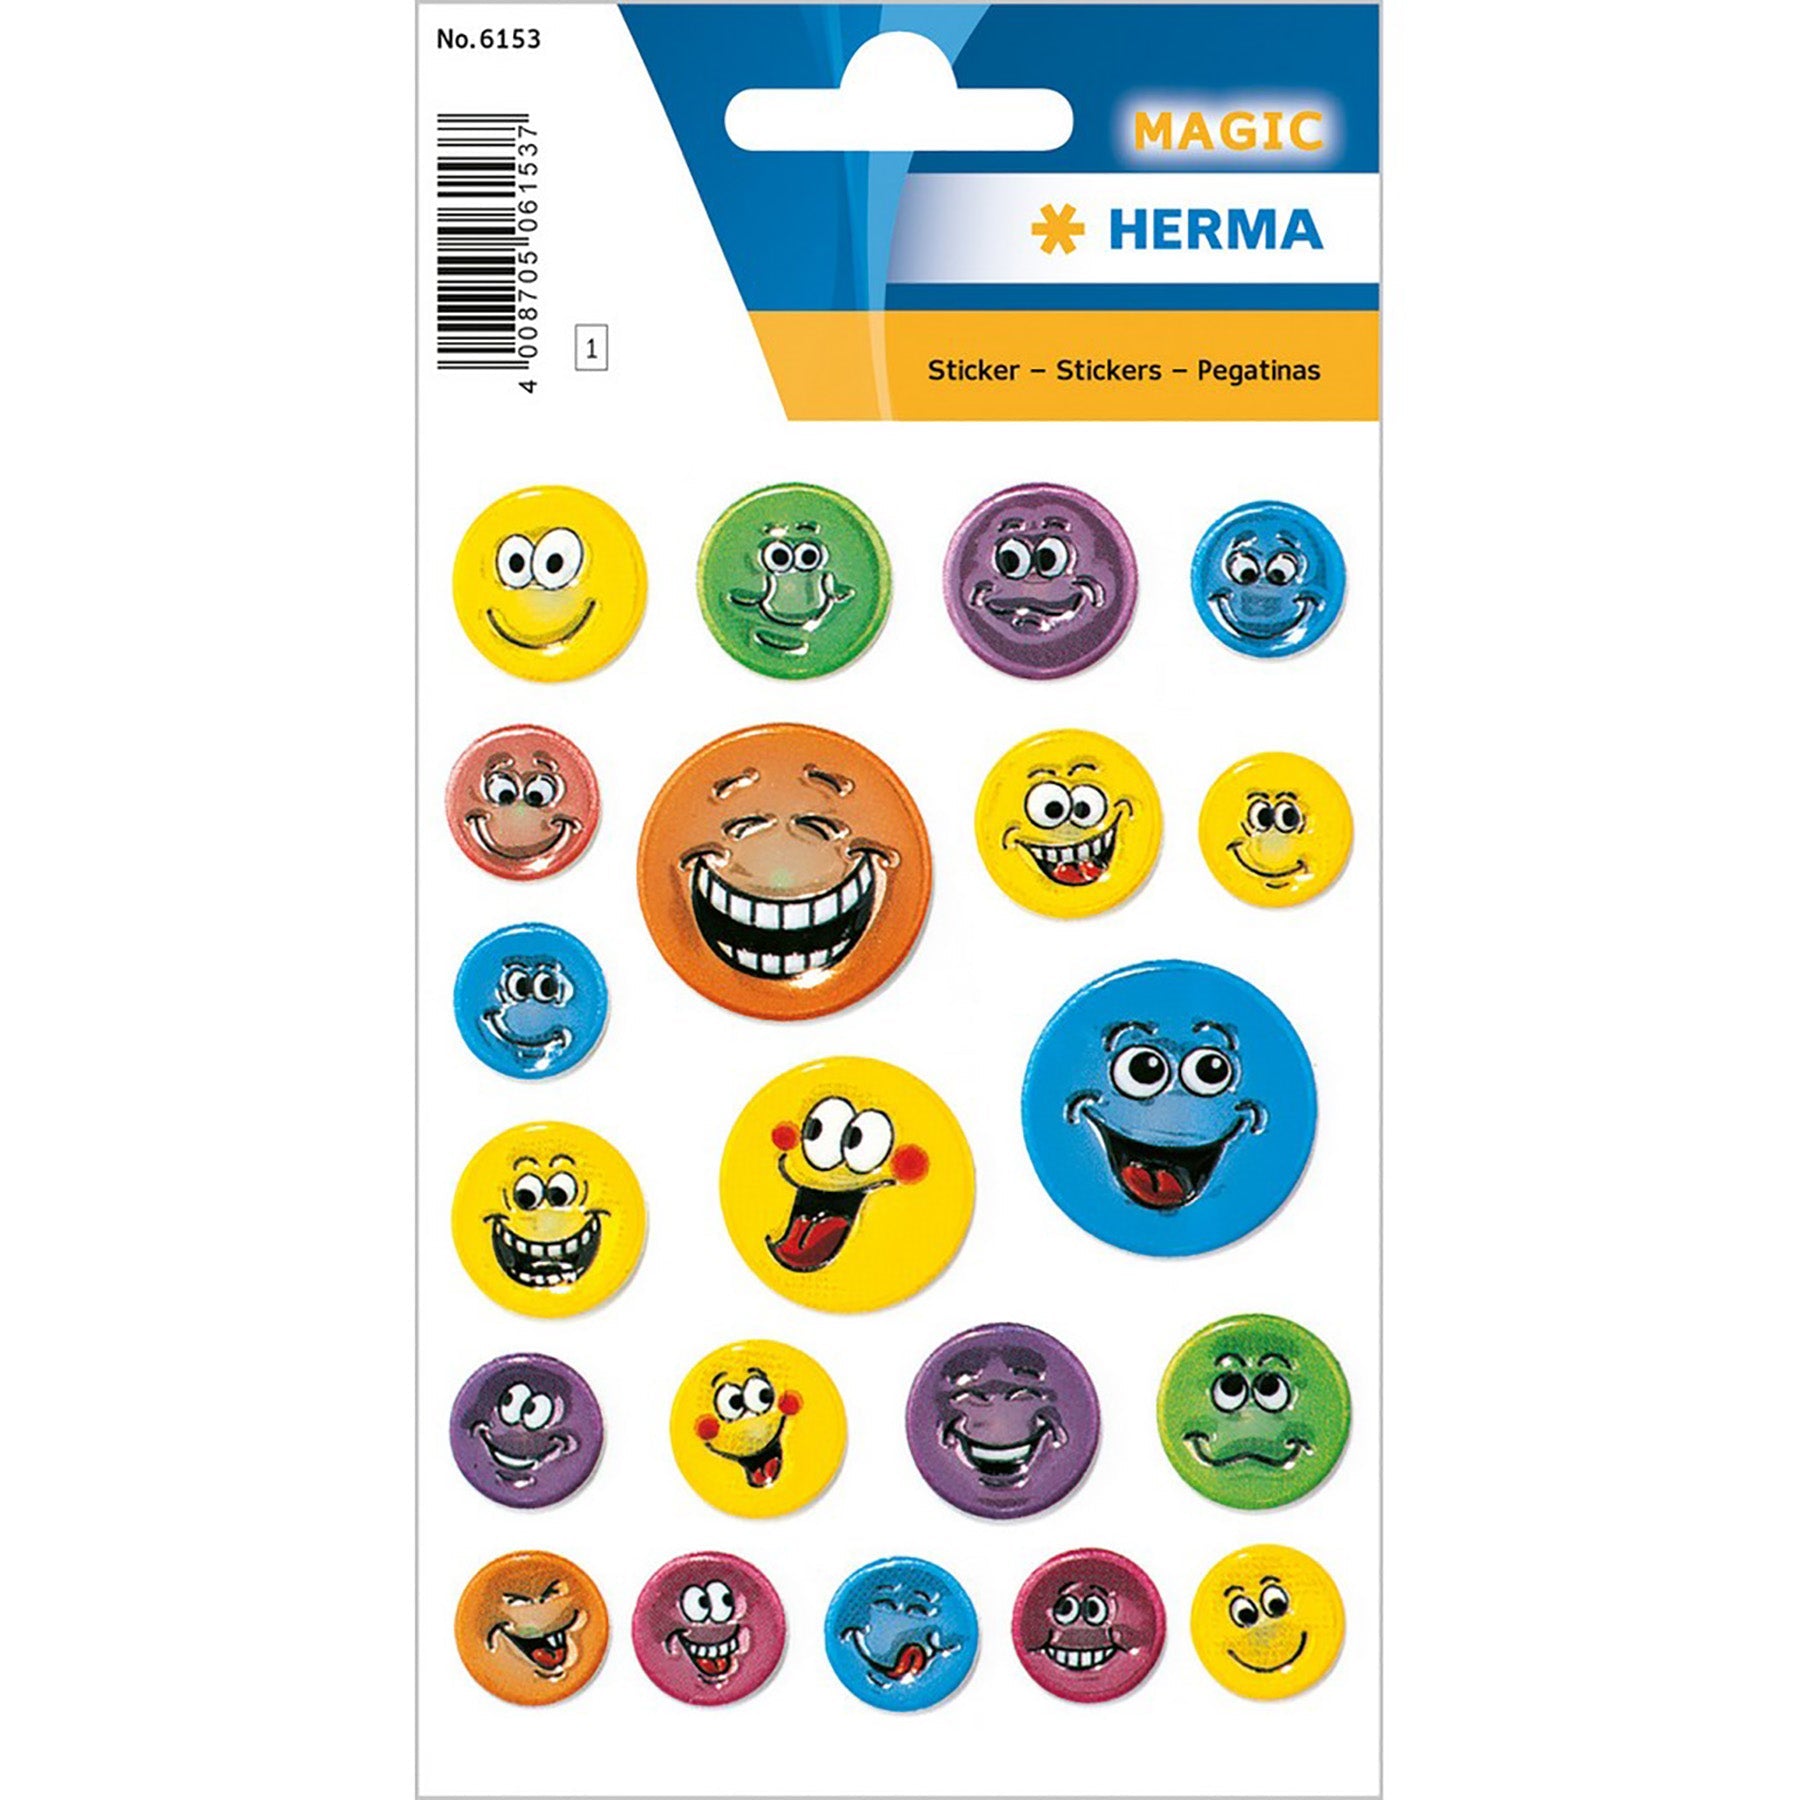 Herma Magic Stickers Faces Embossed 4.75x3.1in Sheet